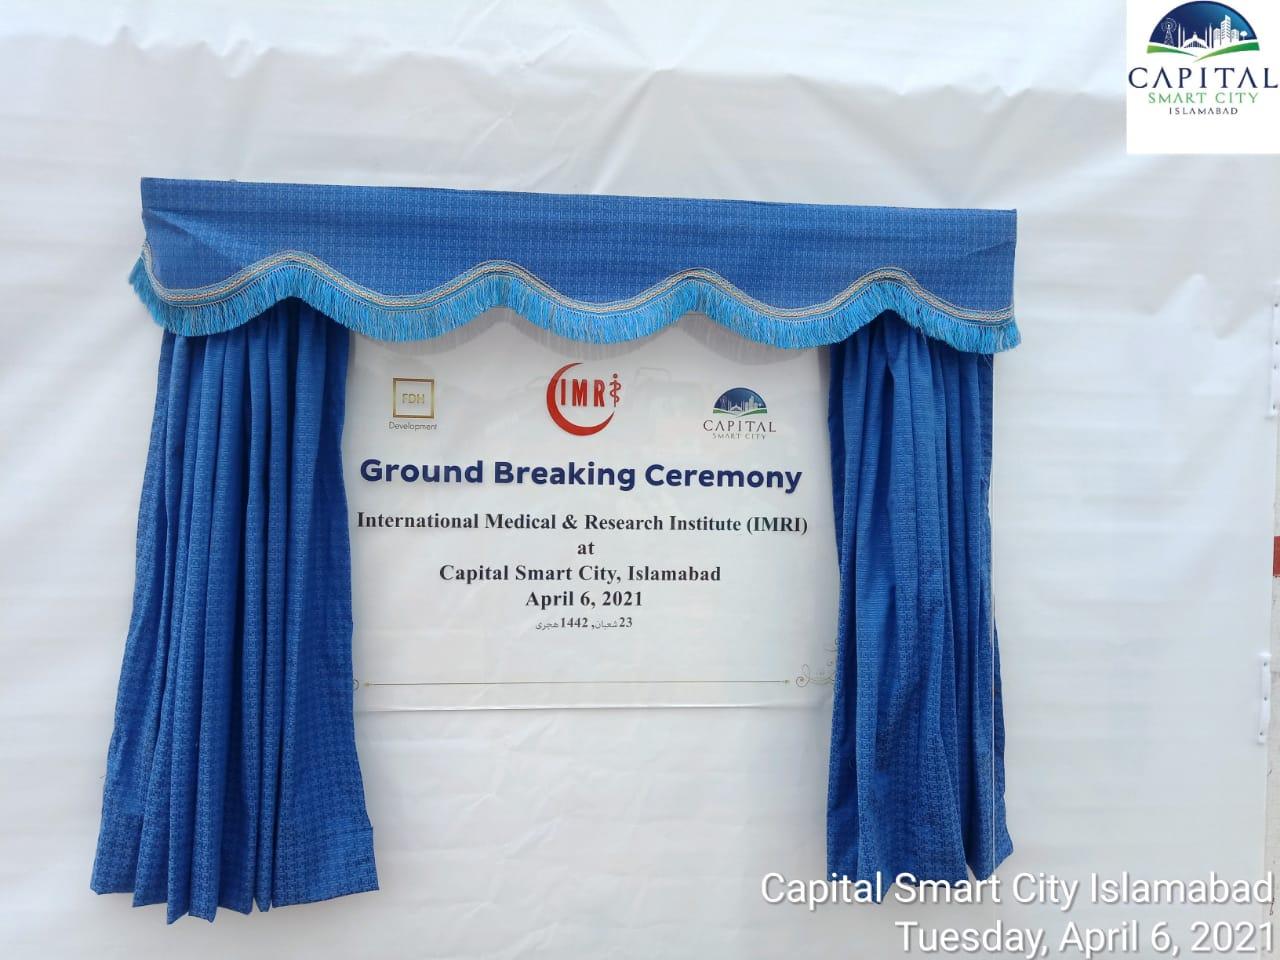 Agreement Signing & Ground Breaking Ceremony - International Medical & Research Institute